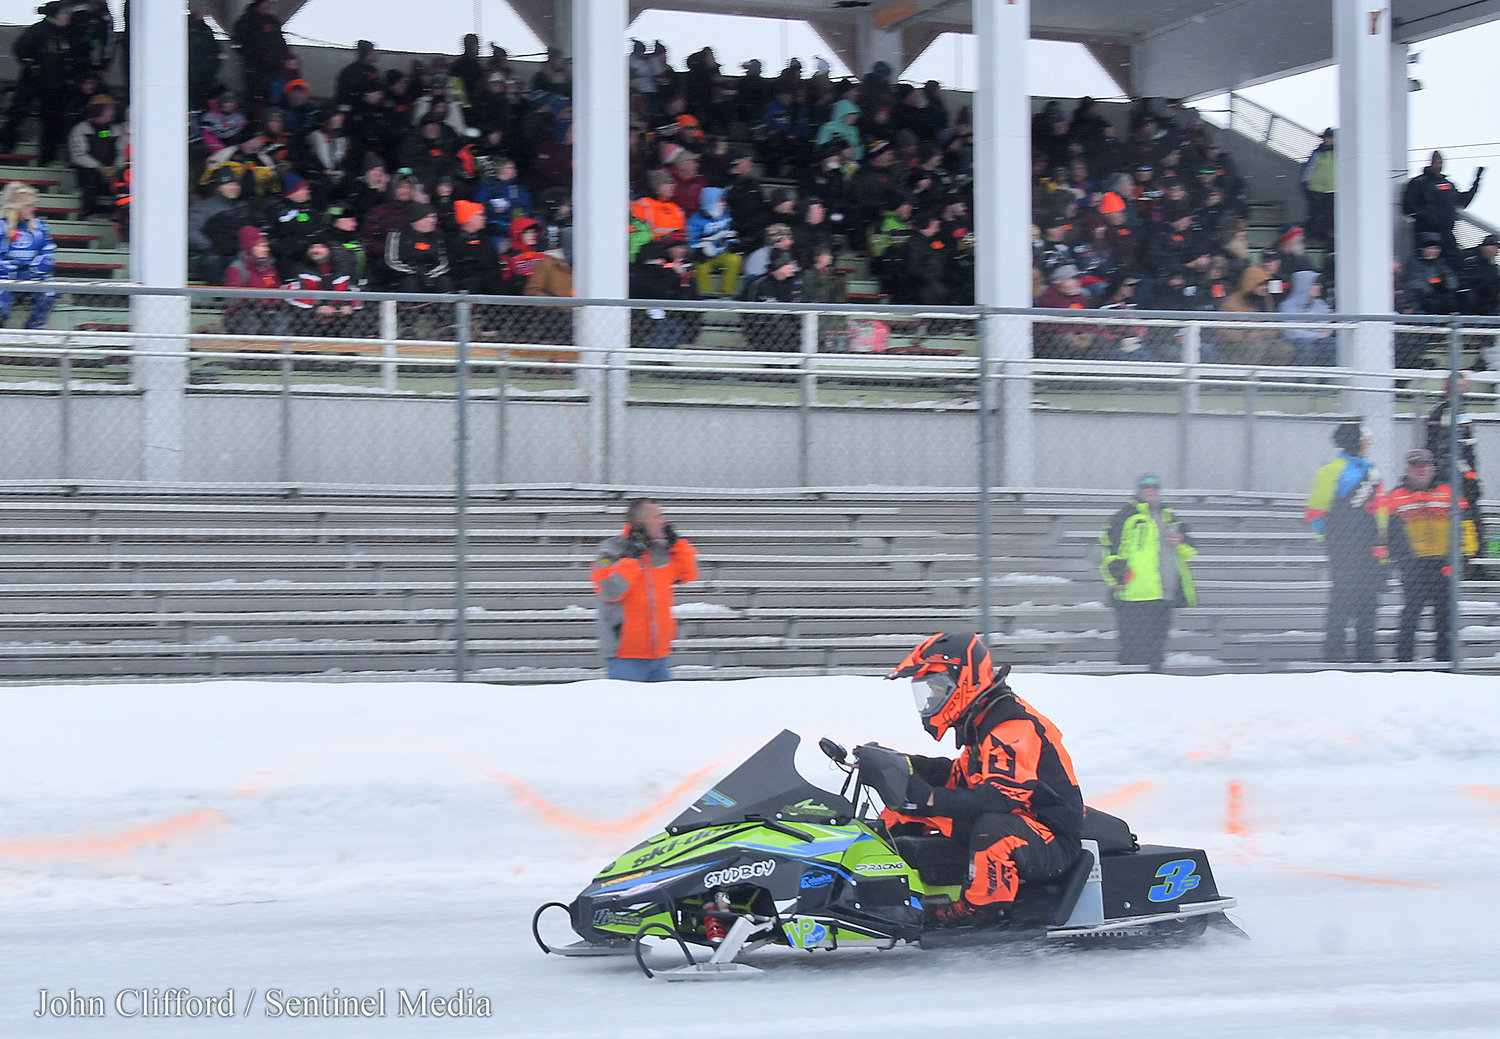 Boonville's Jamie Bourgeiois streaks by the Snow Festival crowd on his way to winning the Pro Champ Adirondack Cup Sunday afternoon at Boonville Fairgounds. It was Bourgeois first win in the race that said in victory lane he has been dreaming of winning for over 15 years.